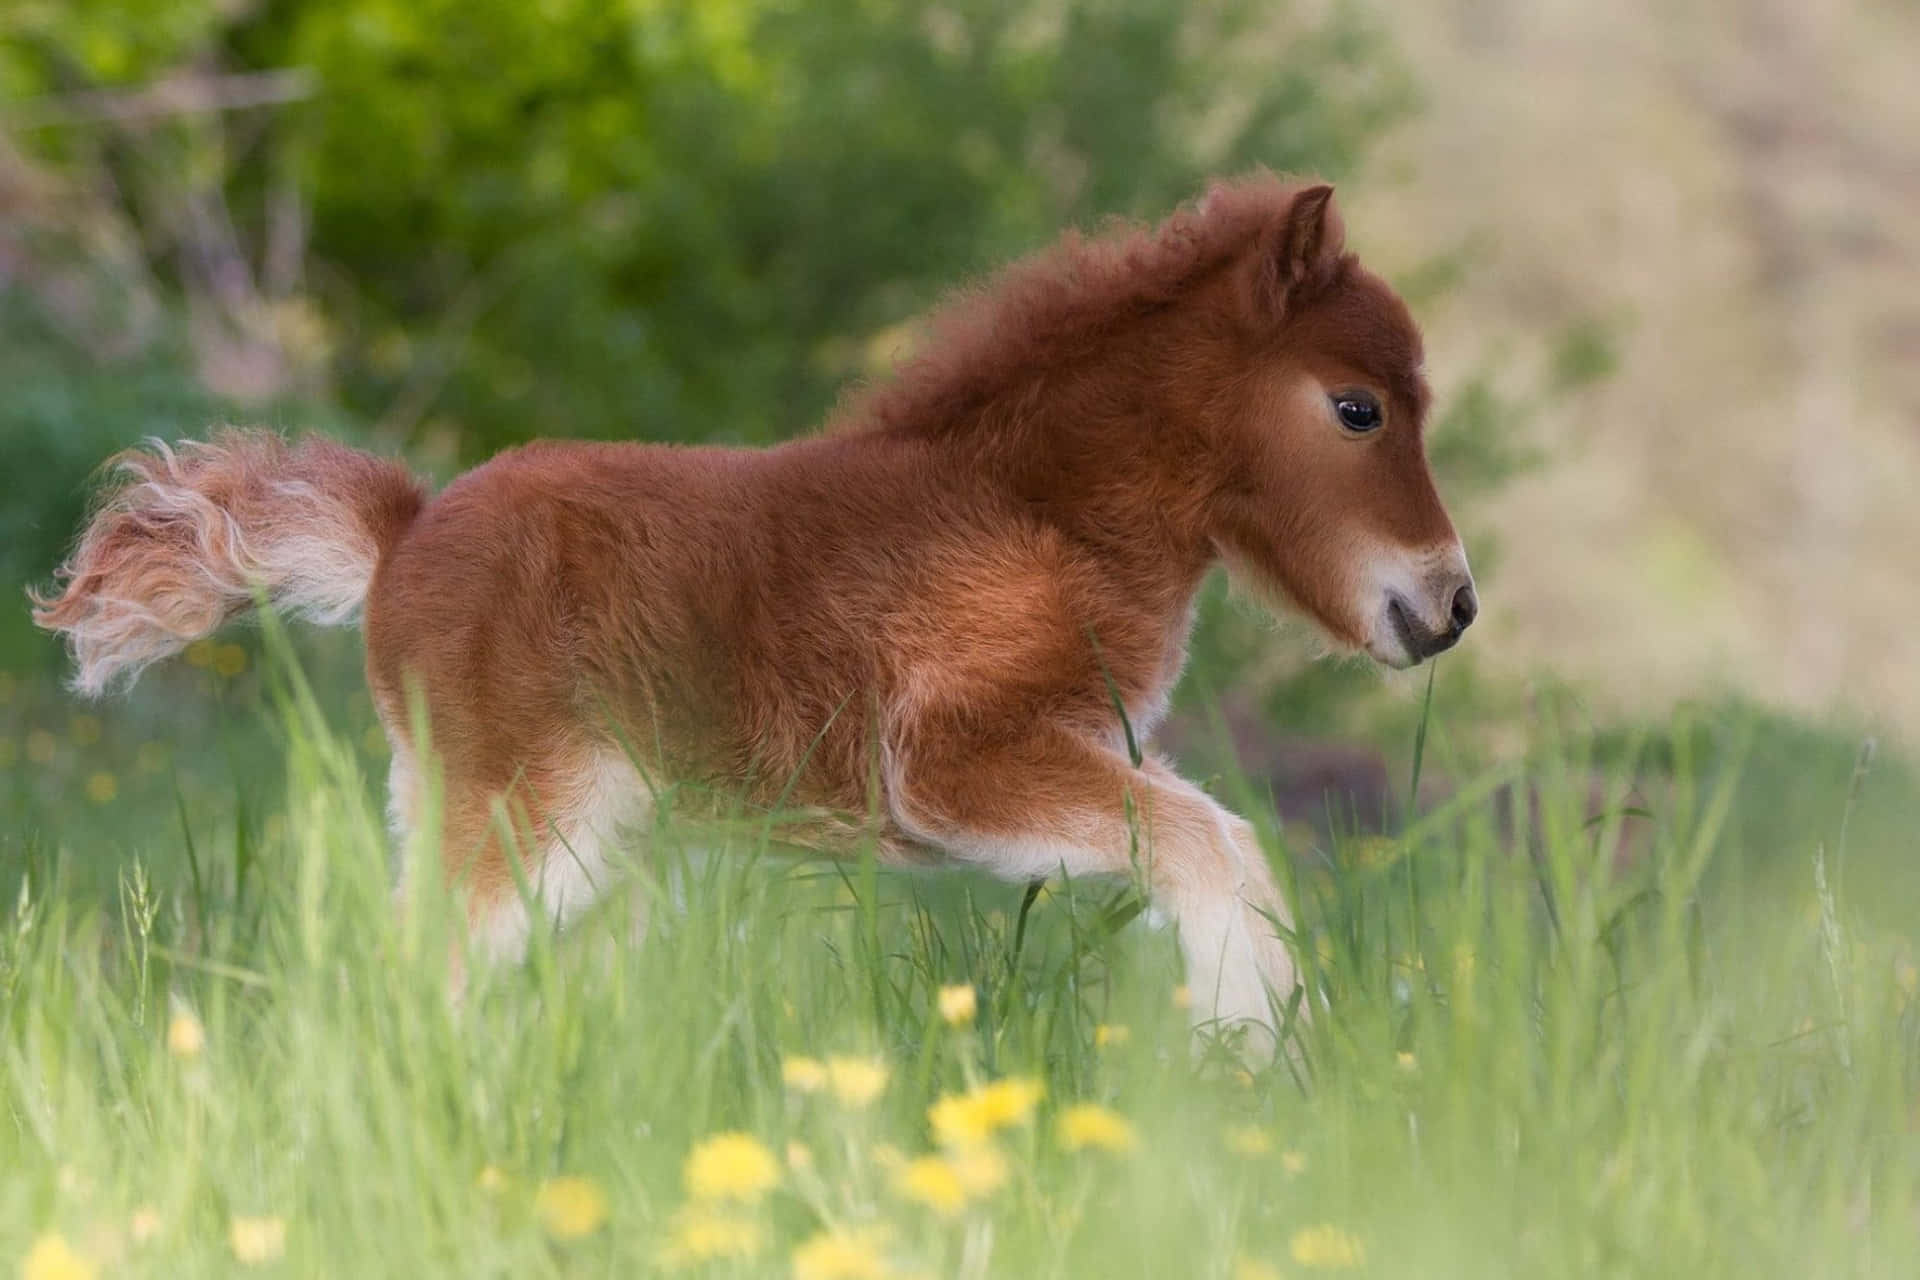 This cute horse is sure to make your day brighter.